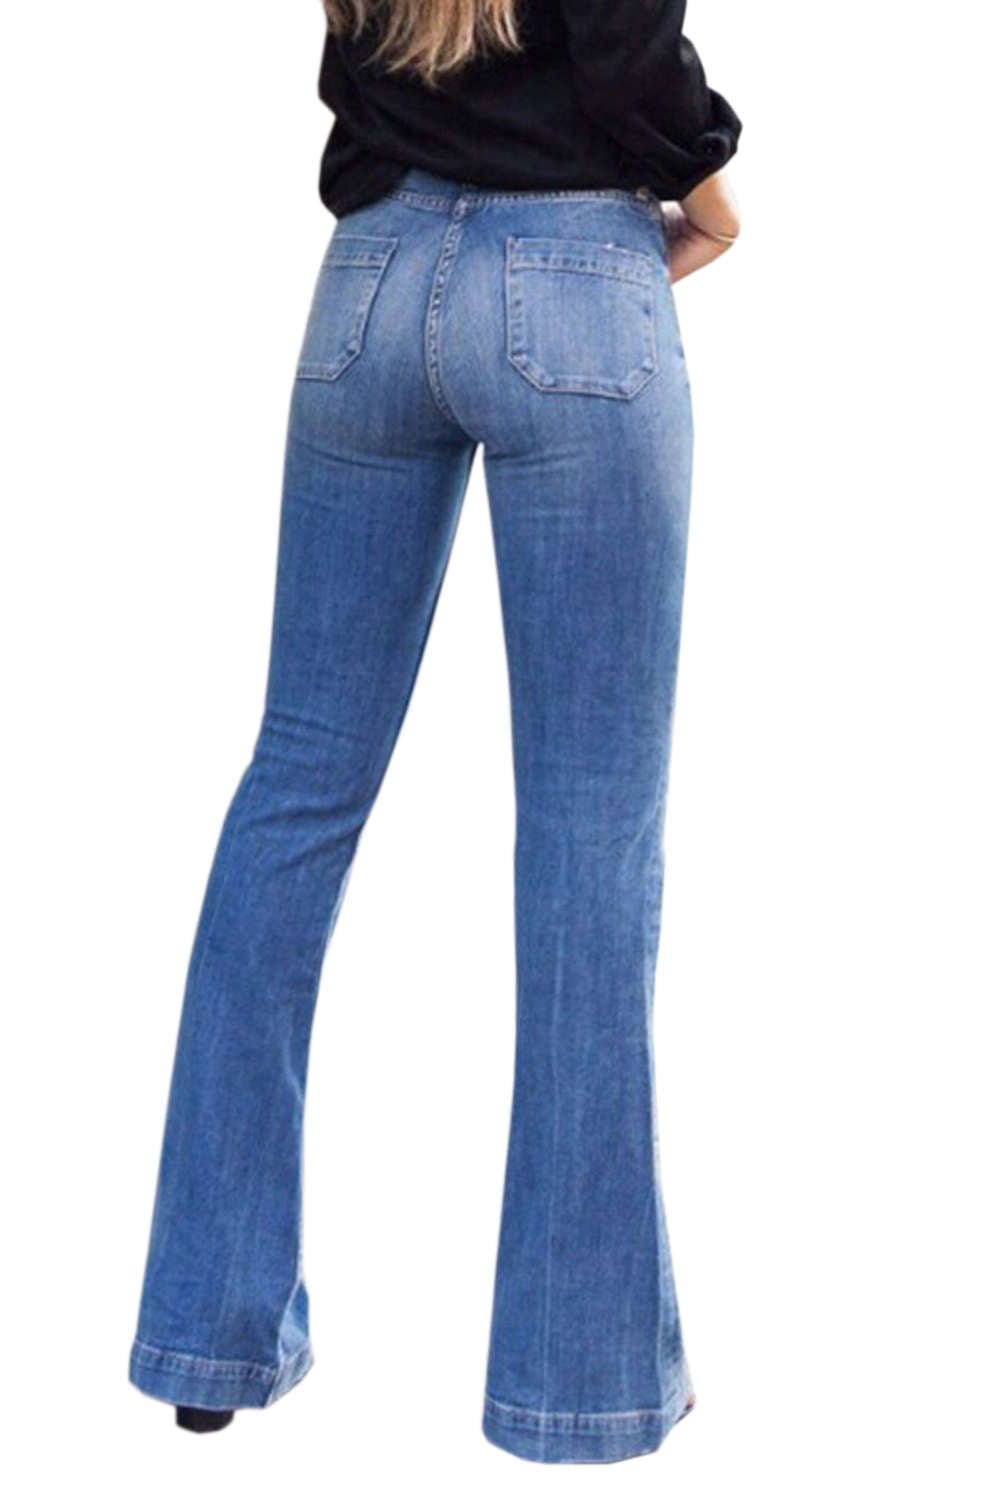 Iyasson Women's Flare Jeans